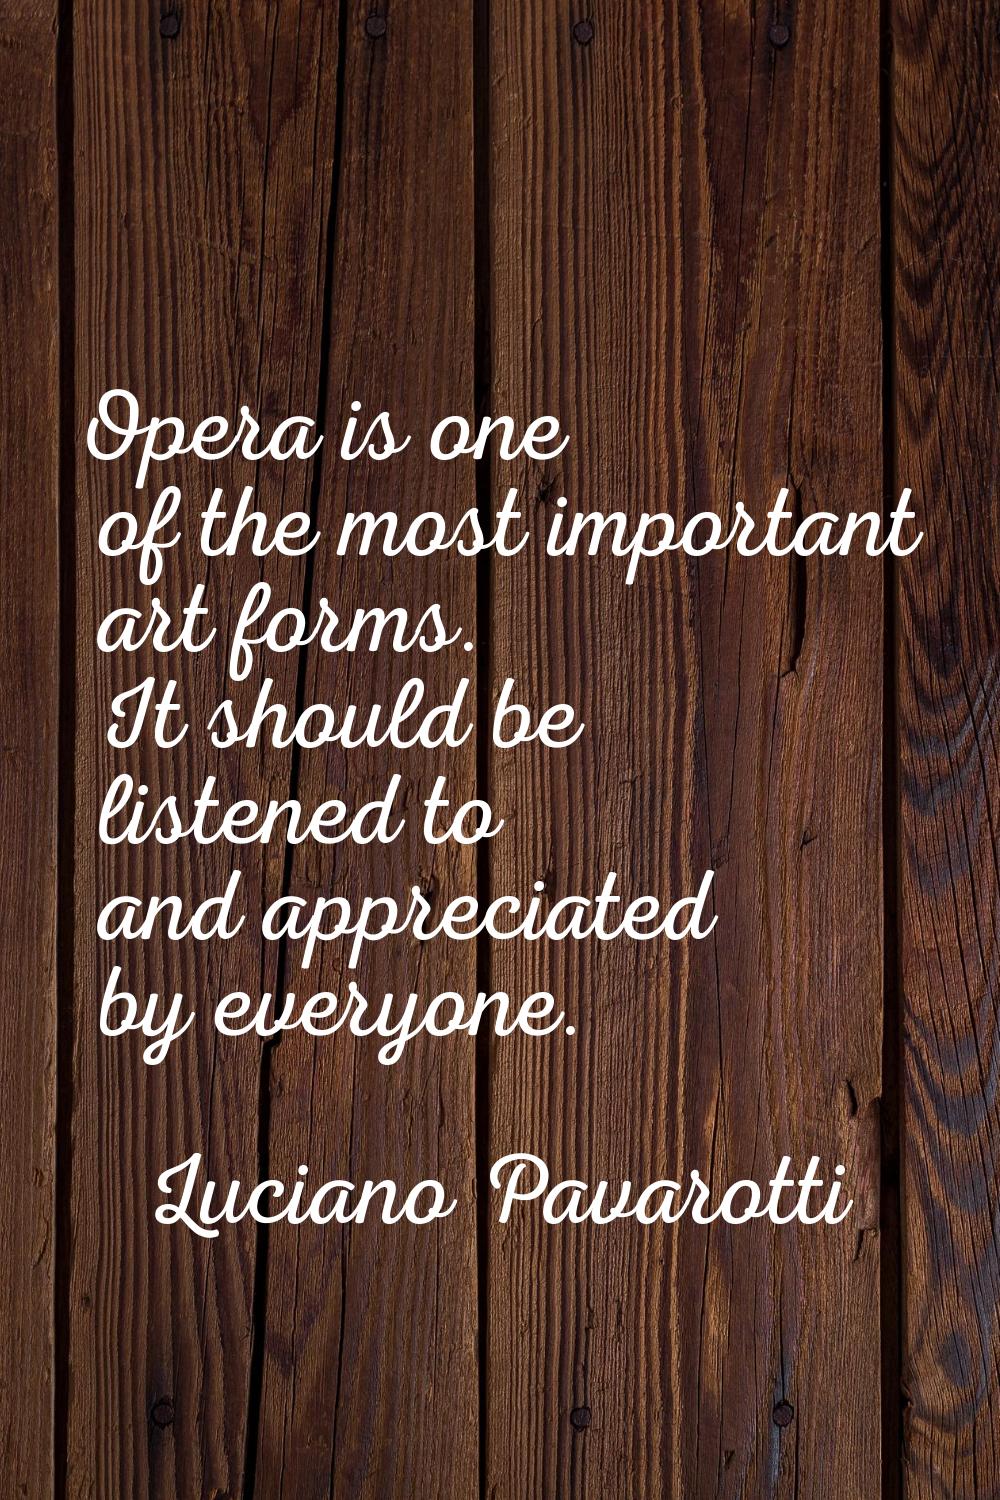 Opera is one of the most important art forms. It should be listened to and appreciated by everyone.